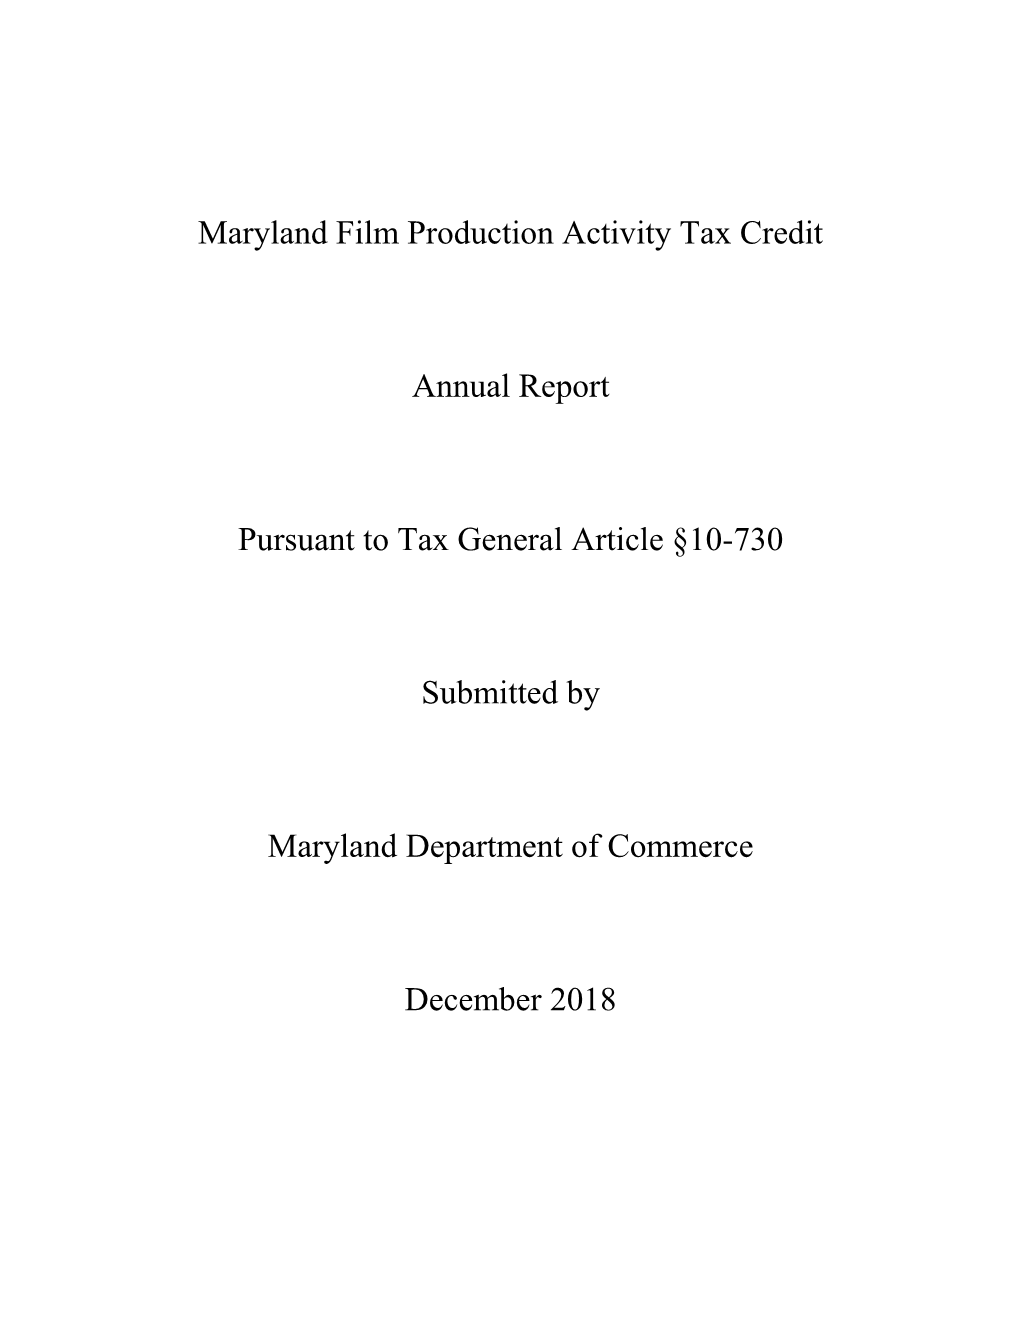 Film Production Activity Tax Credit Report 2018